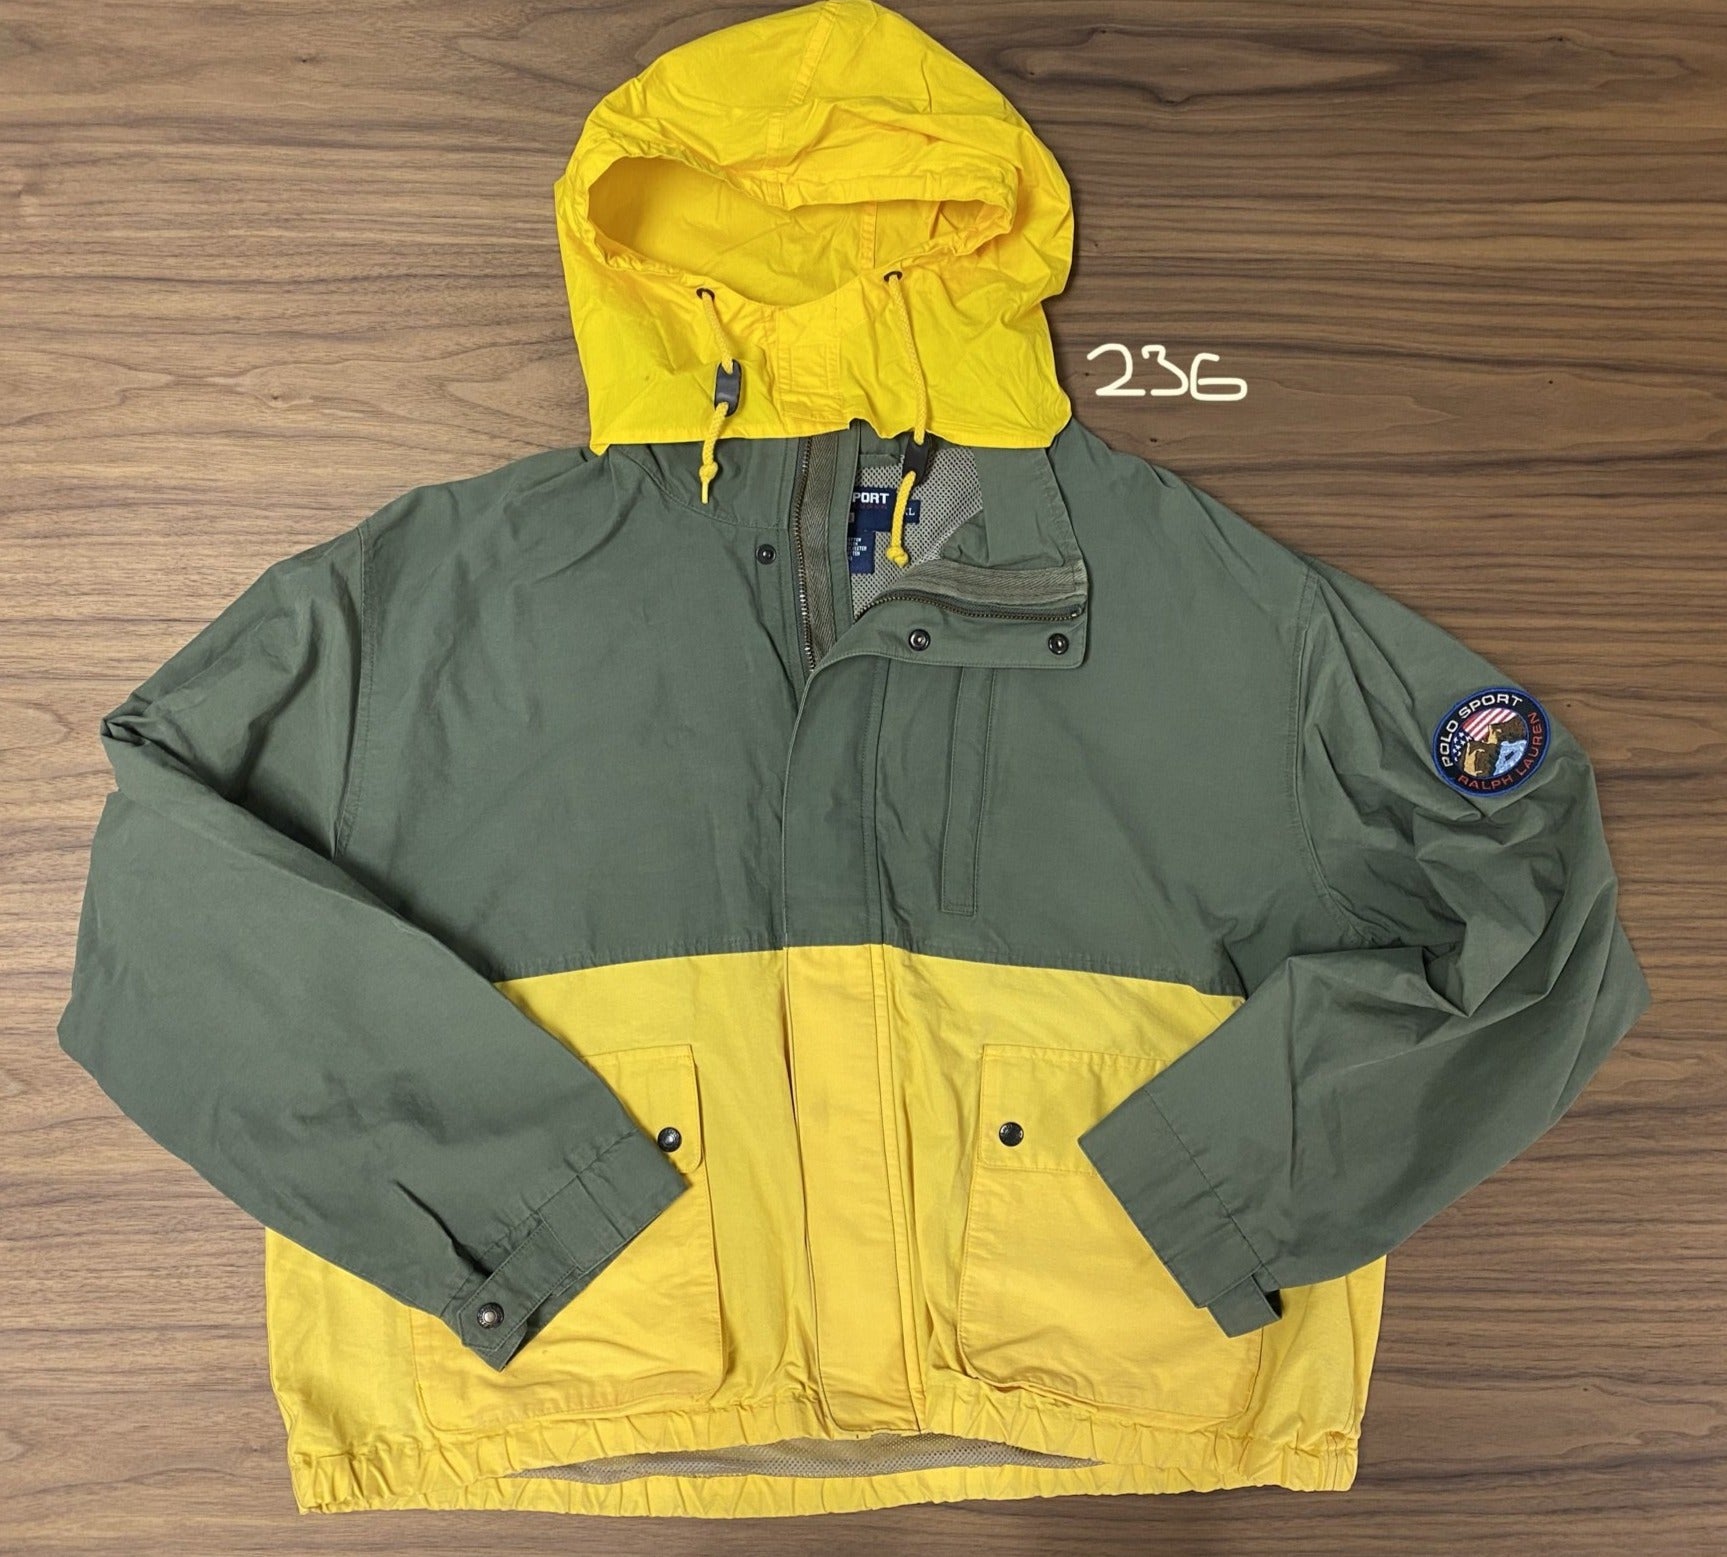 Polo by Ralph Lauren Two Toned Jacket - Olive/Yellow